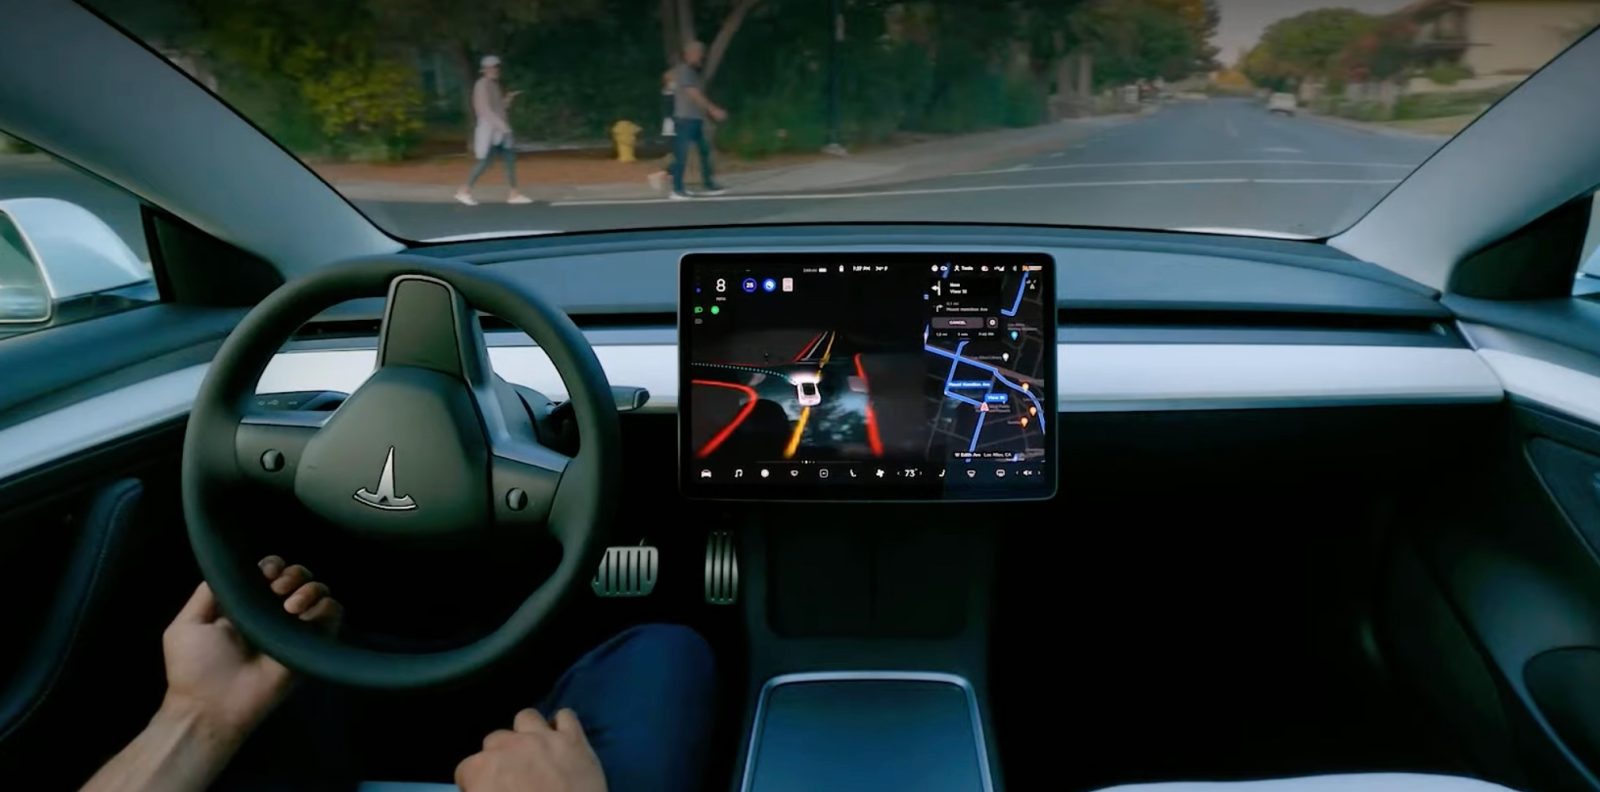 Tesla pushes new Full Self-Driving Beta update with improved object  detection - Electrek